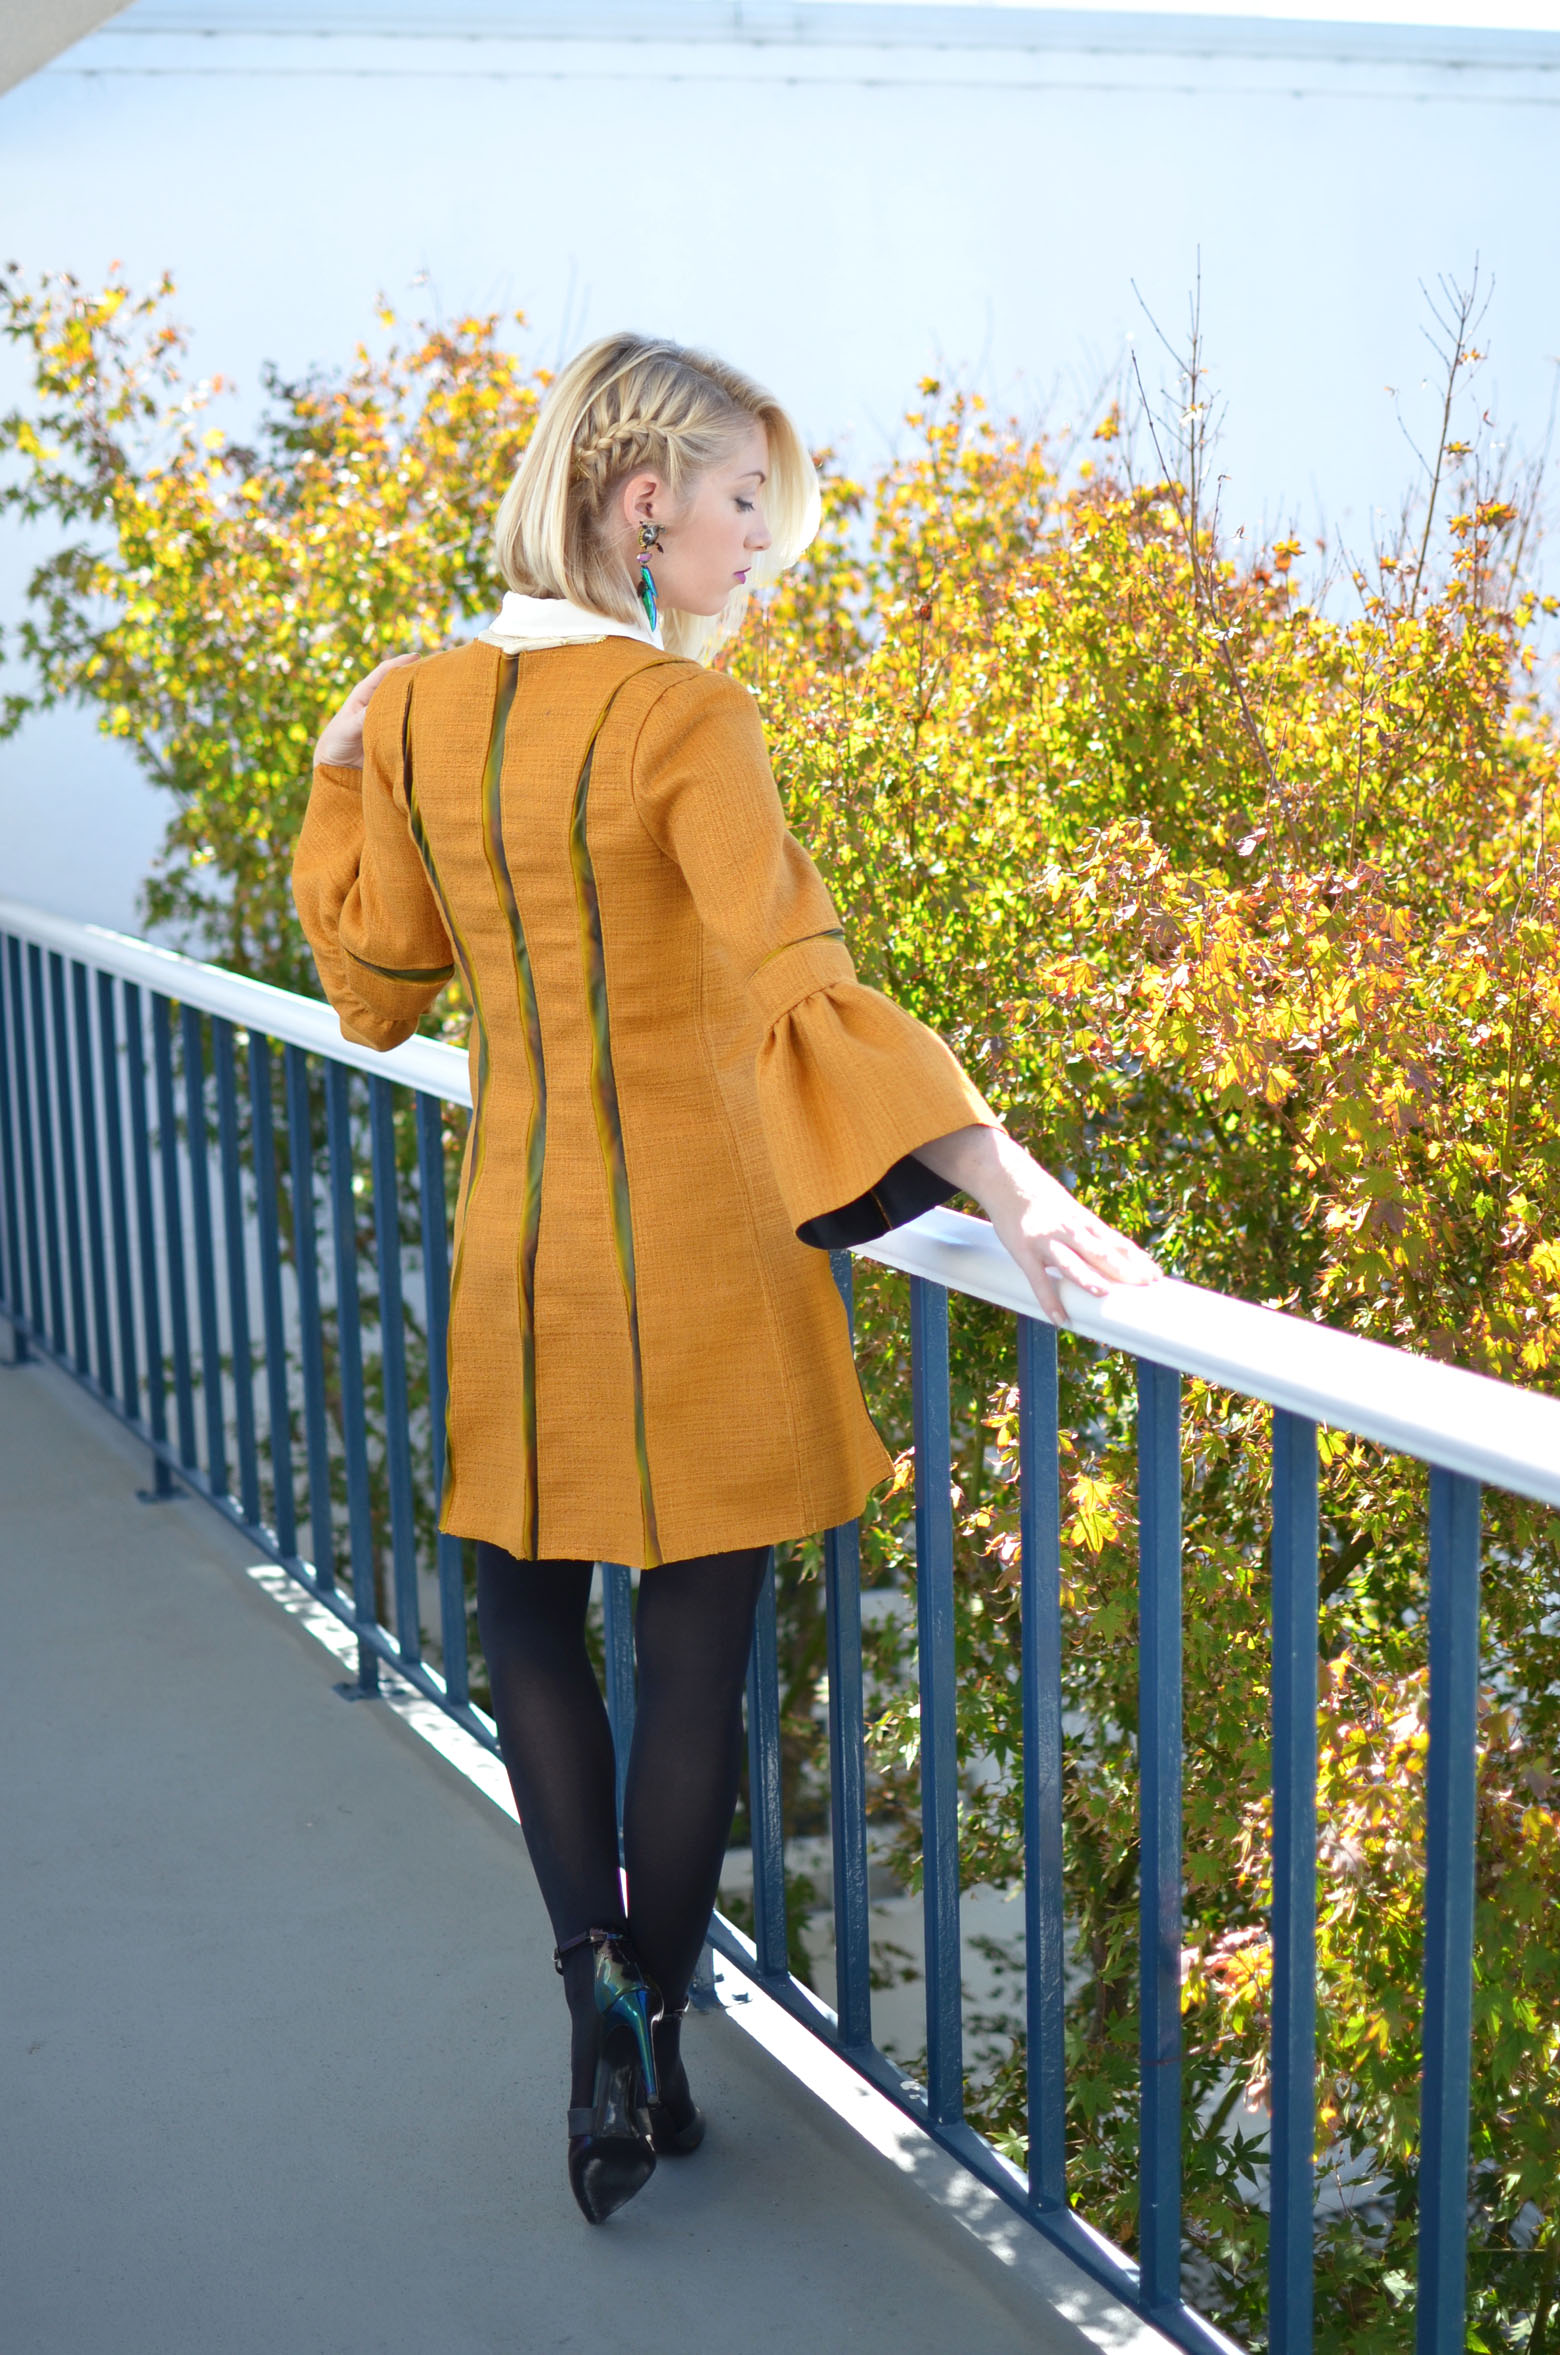 Stefanie makes her second project for Project RealWay challenge, mustard yellow coat dress for the everyday woman // thestylesafari.com